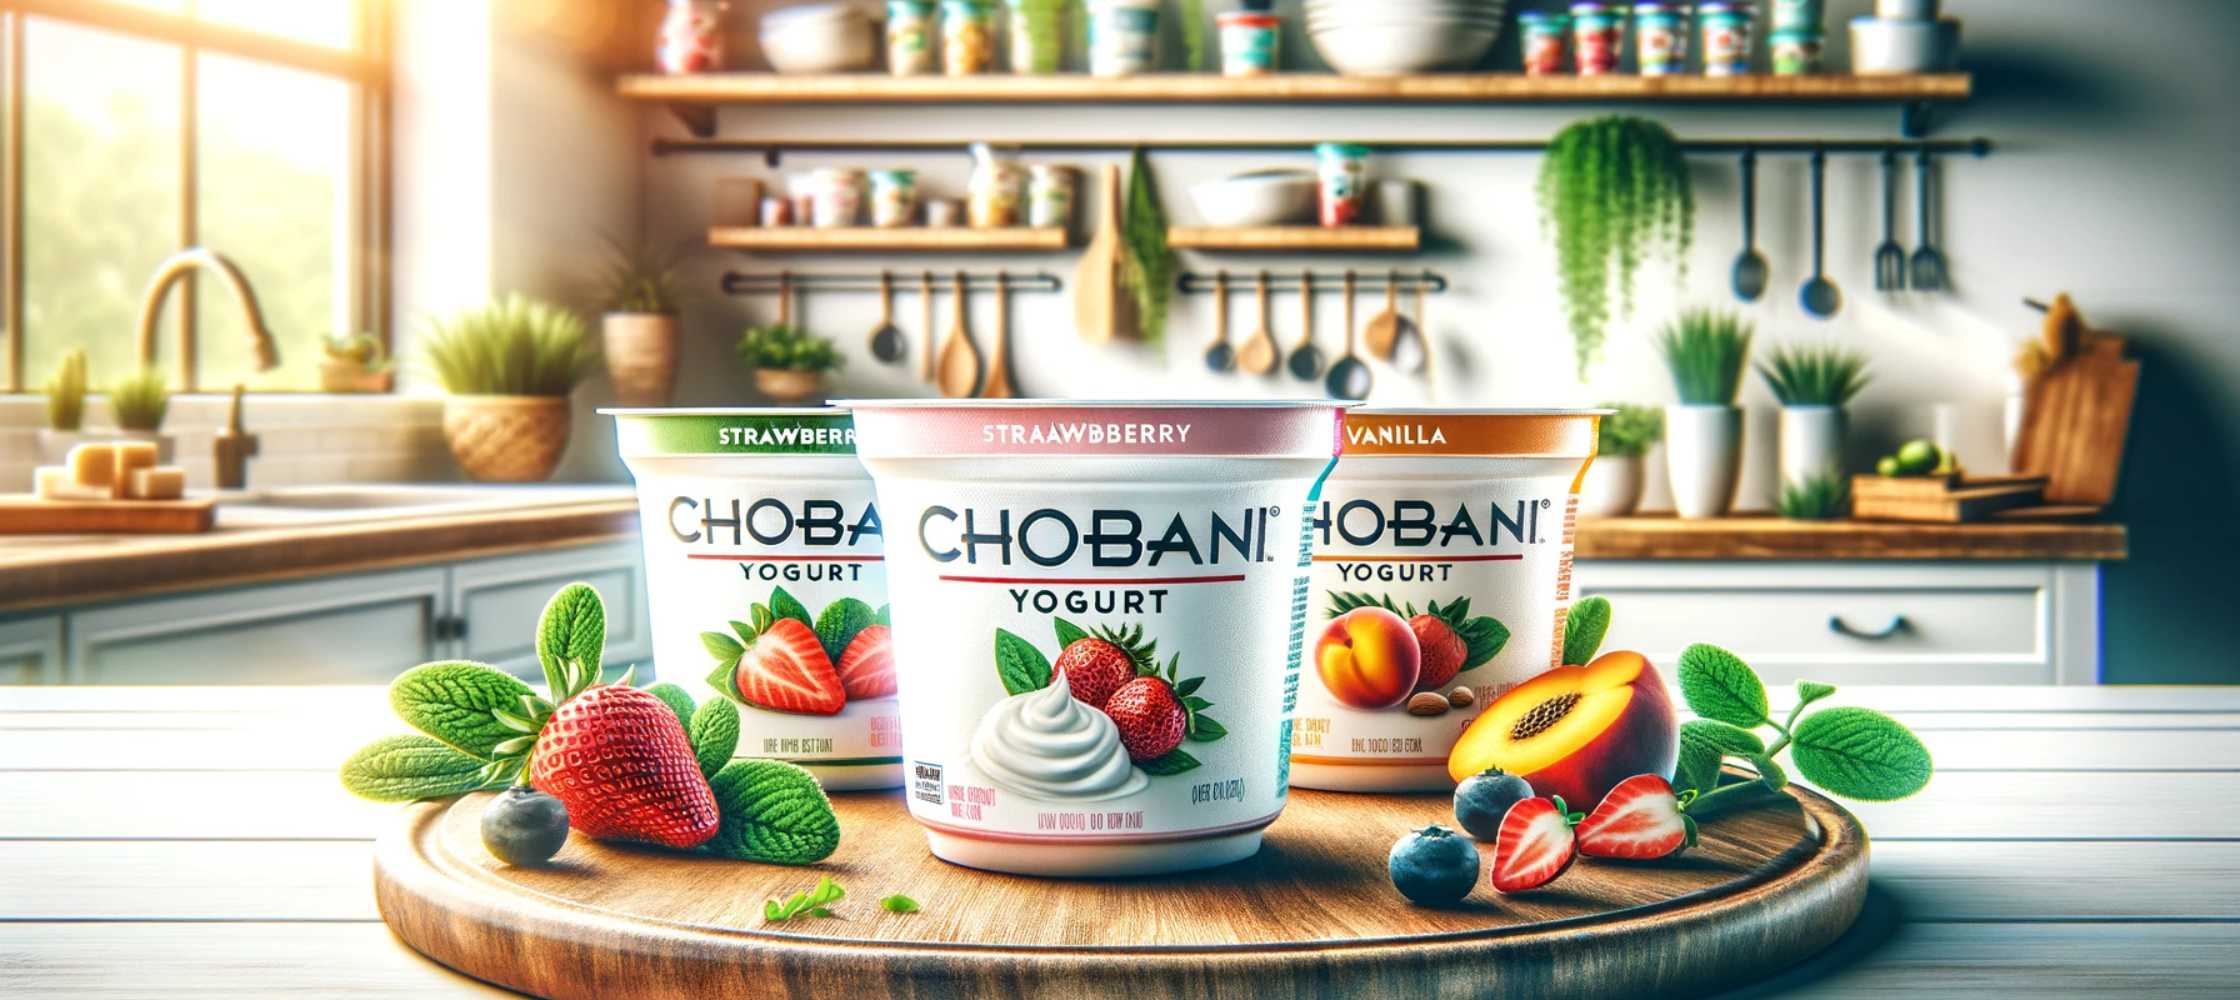 Is Chobani Healthy? Benefits and Comparisons